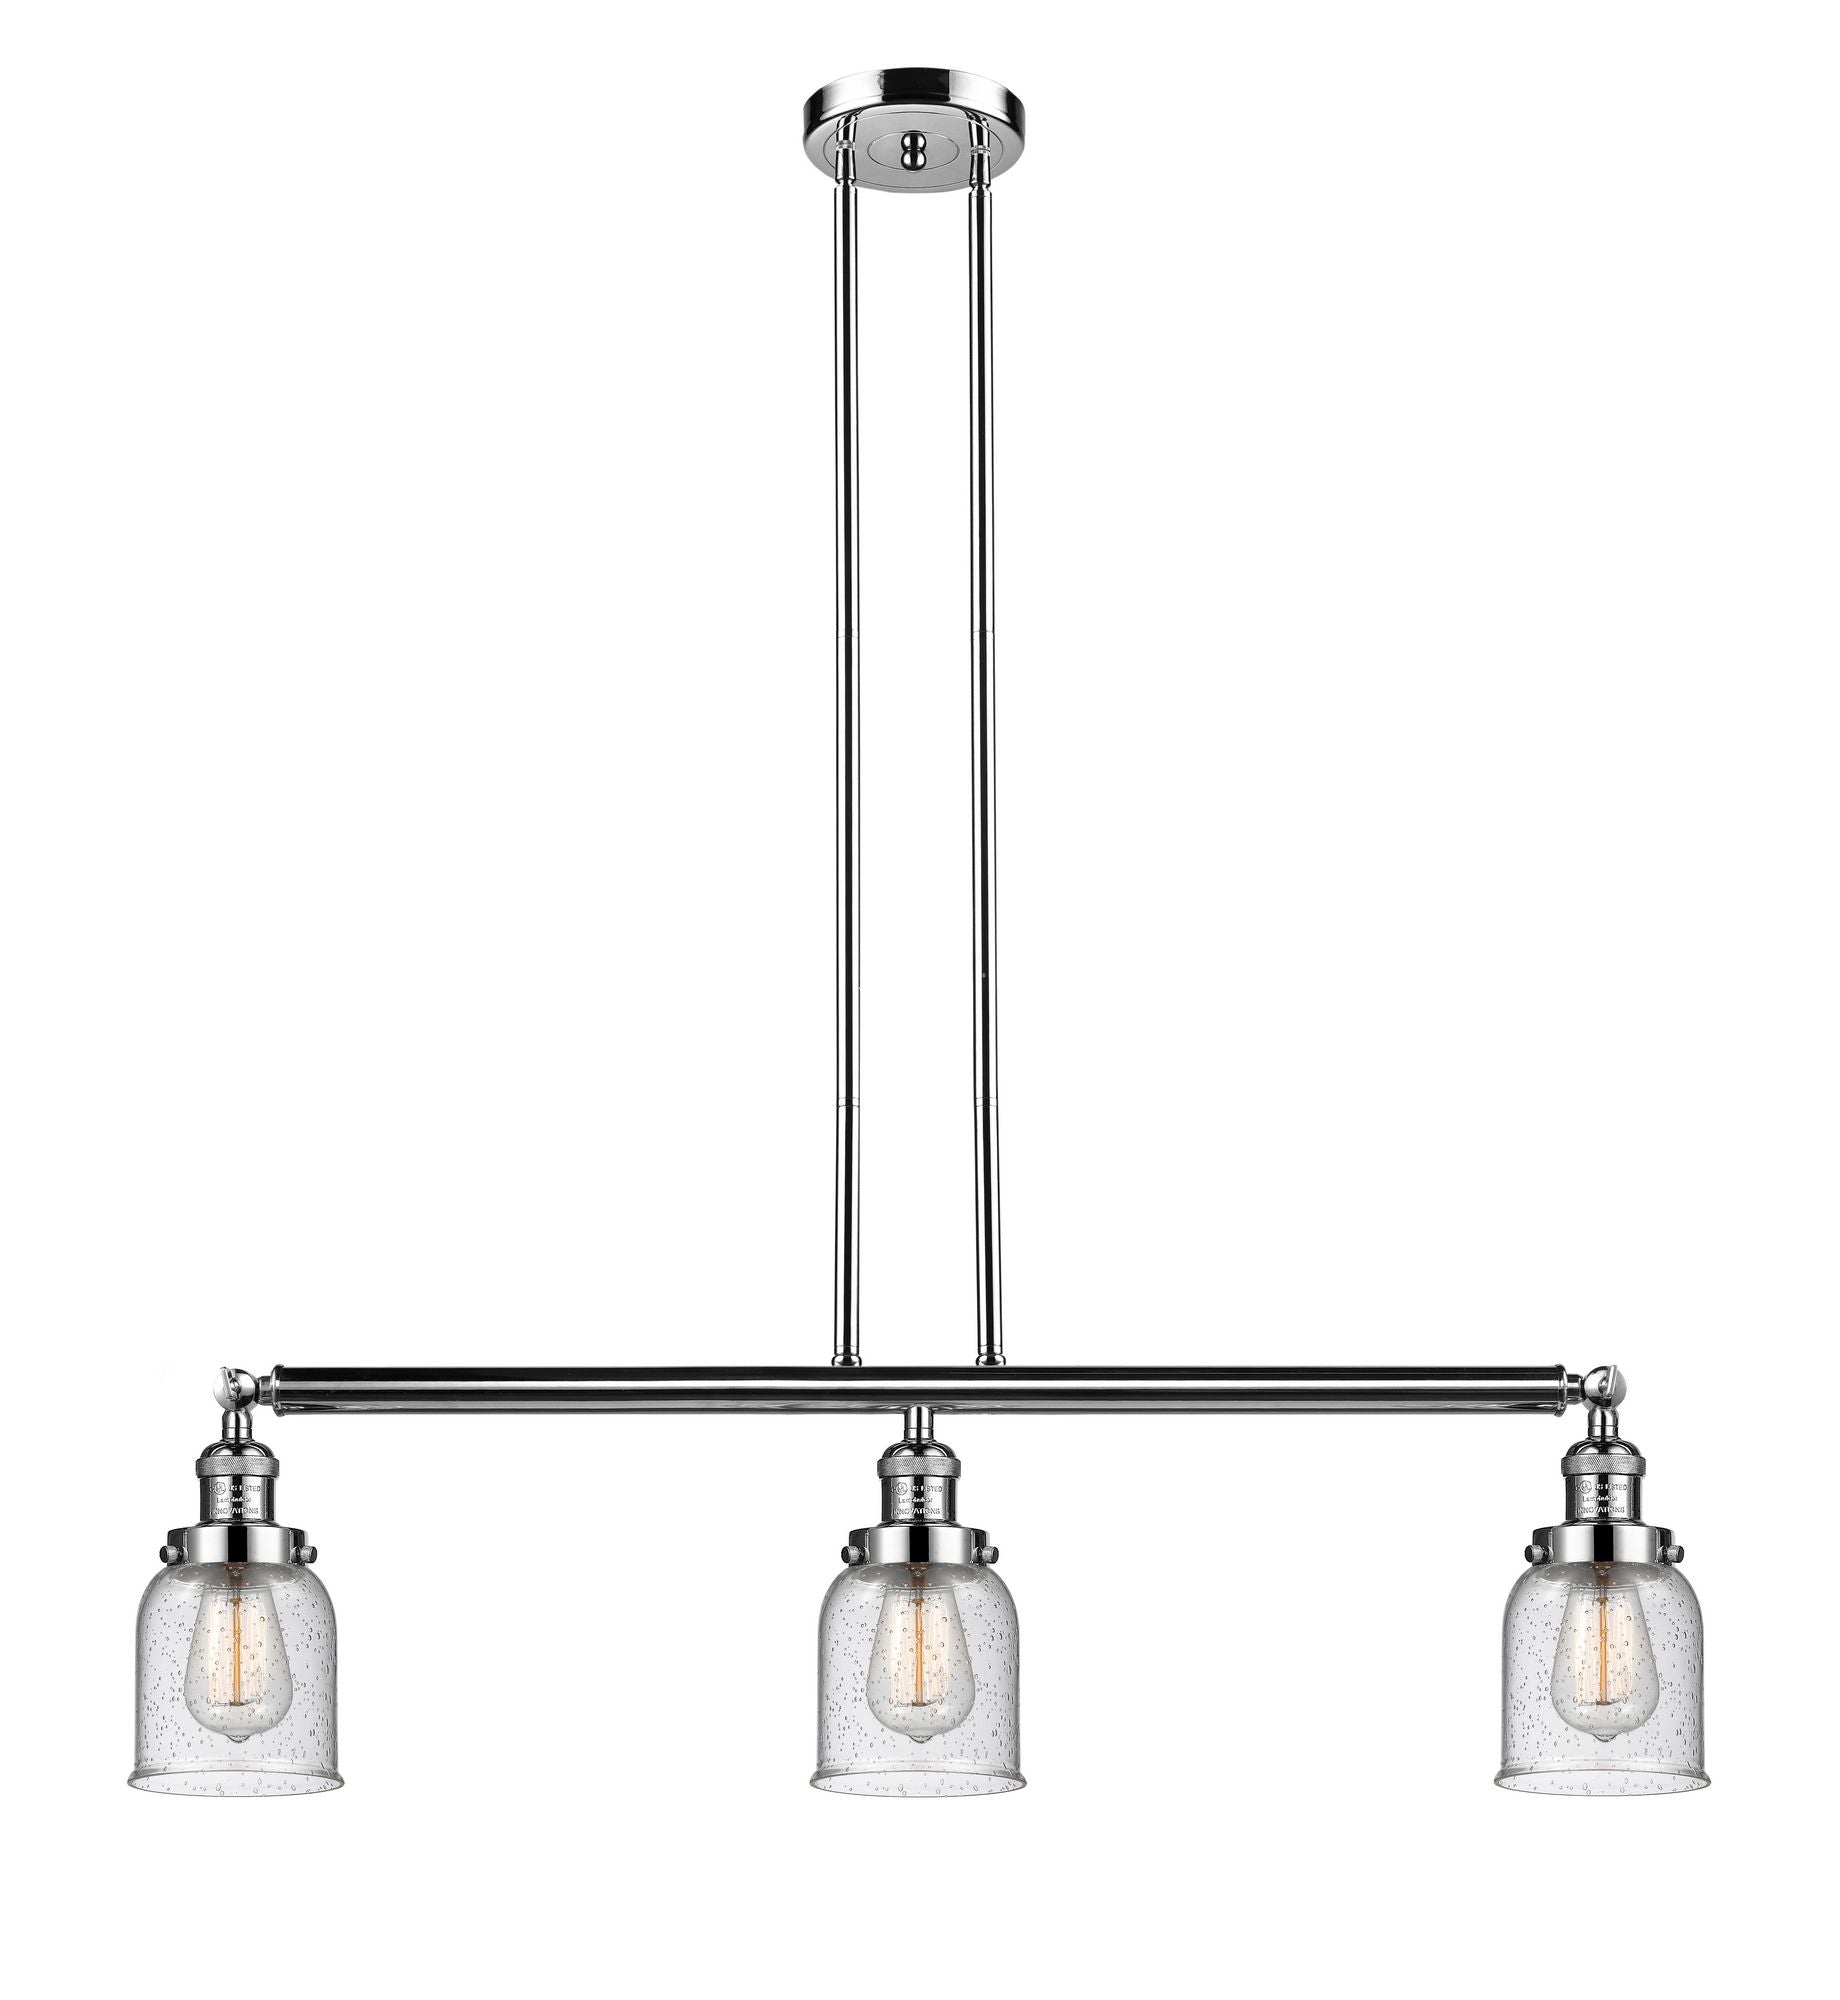 213-PN-G54 3-Light 37.5" Polished Nickel Island Light - Seedy Small Bell Glass - LED Bulb - Dimmensions: 37.5 x 7.5 x 10<br>Minimum Height : 20<br>Maximum Height : 44 - Sloped Ceiling Compatible: Yes